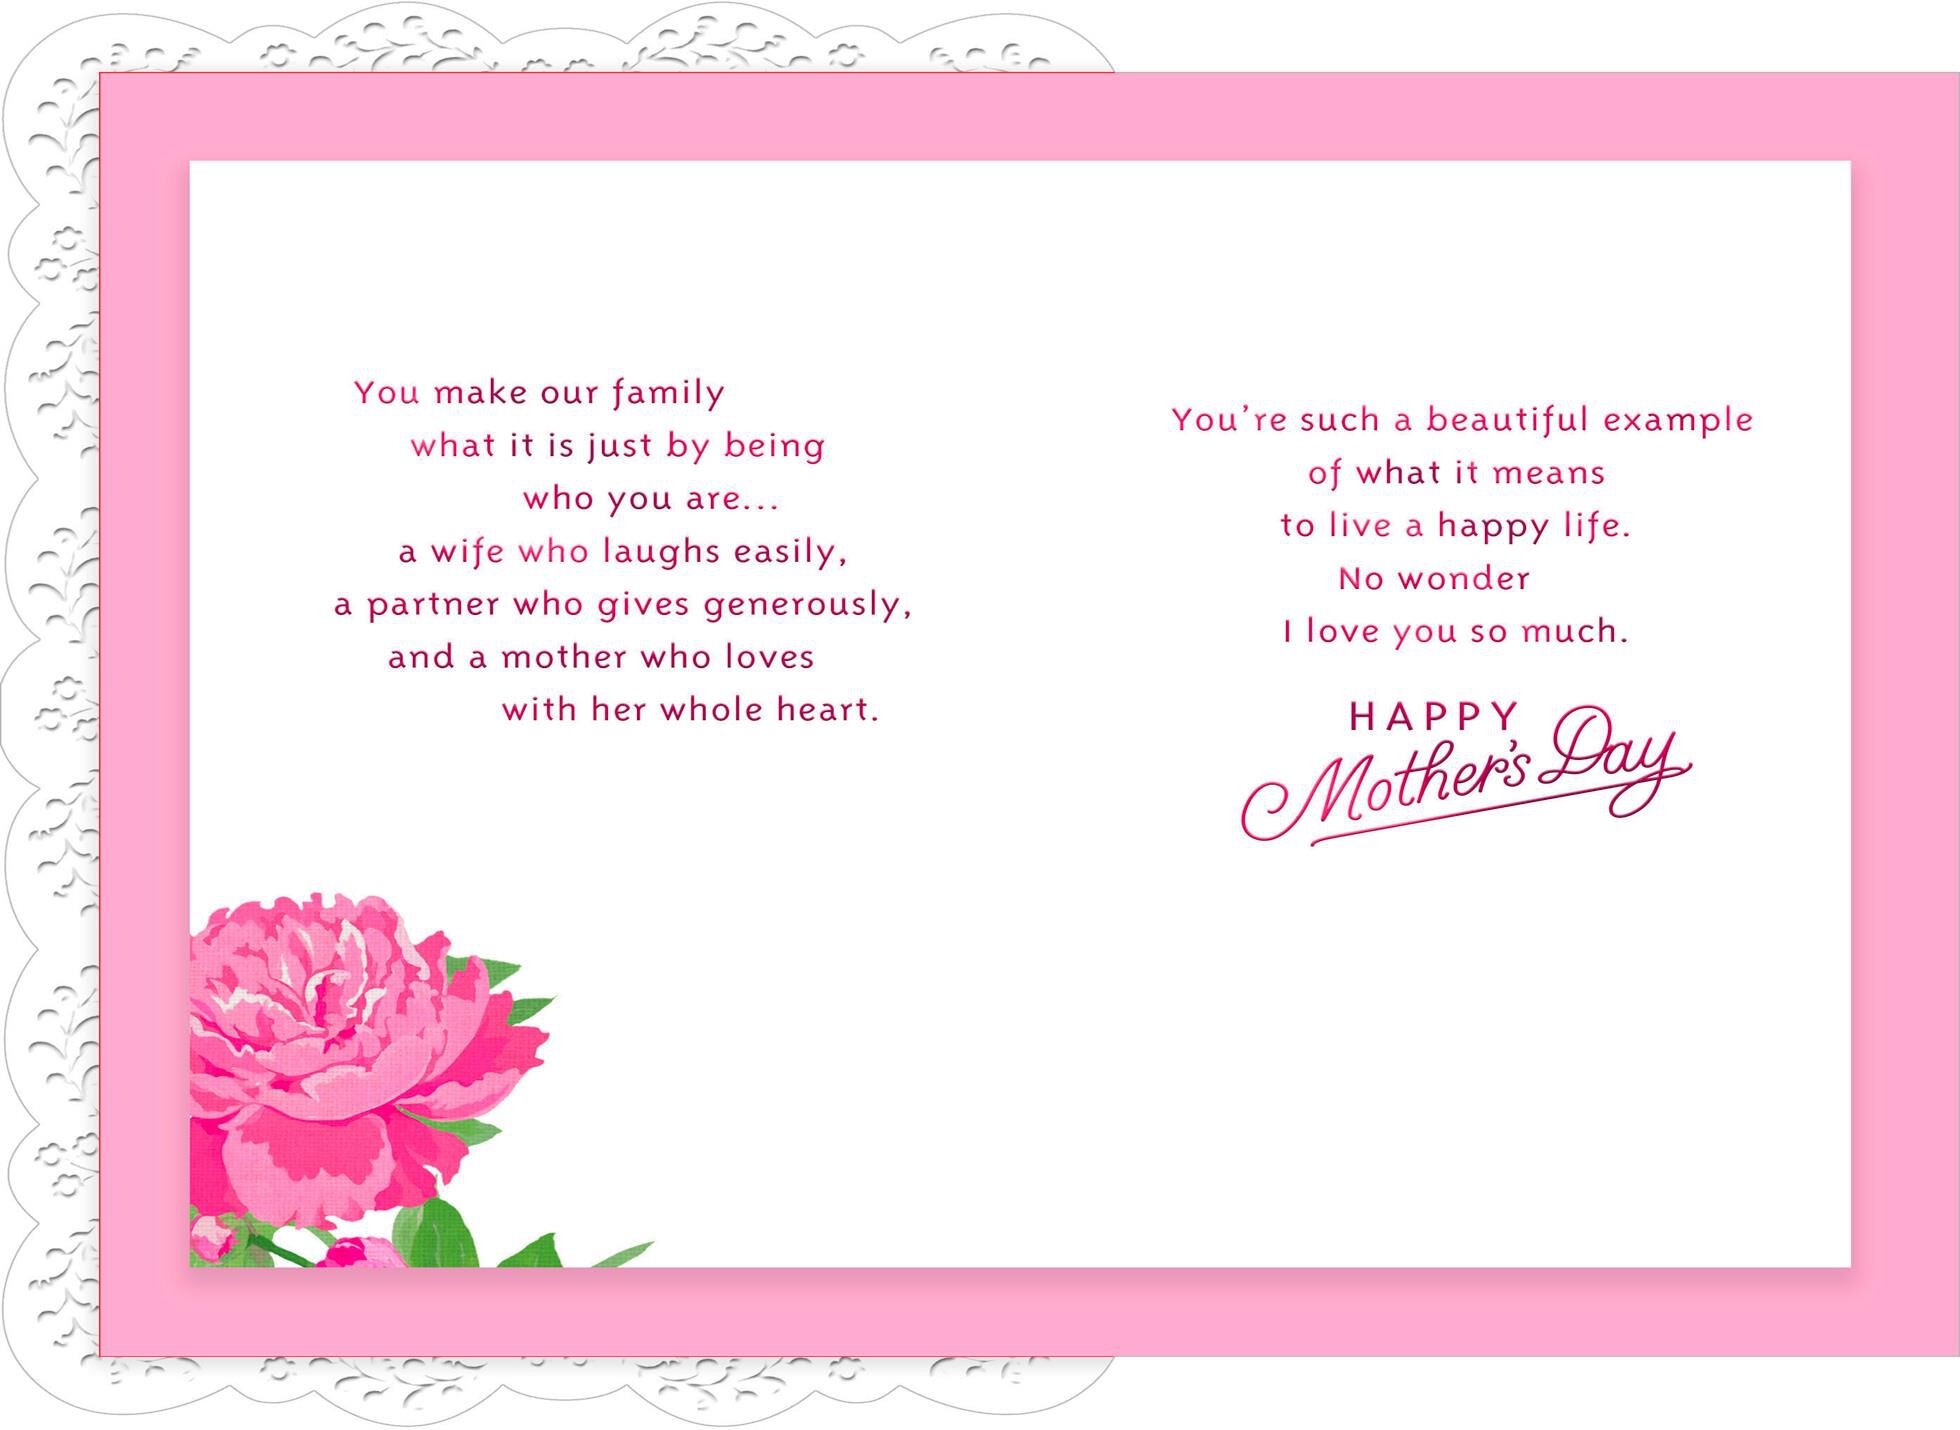 Framed Pink Rose Mother's Day Card for Wife Greeting